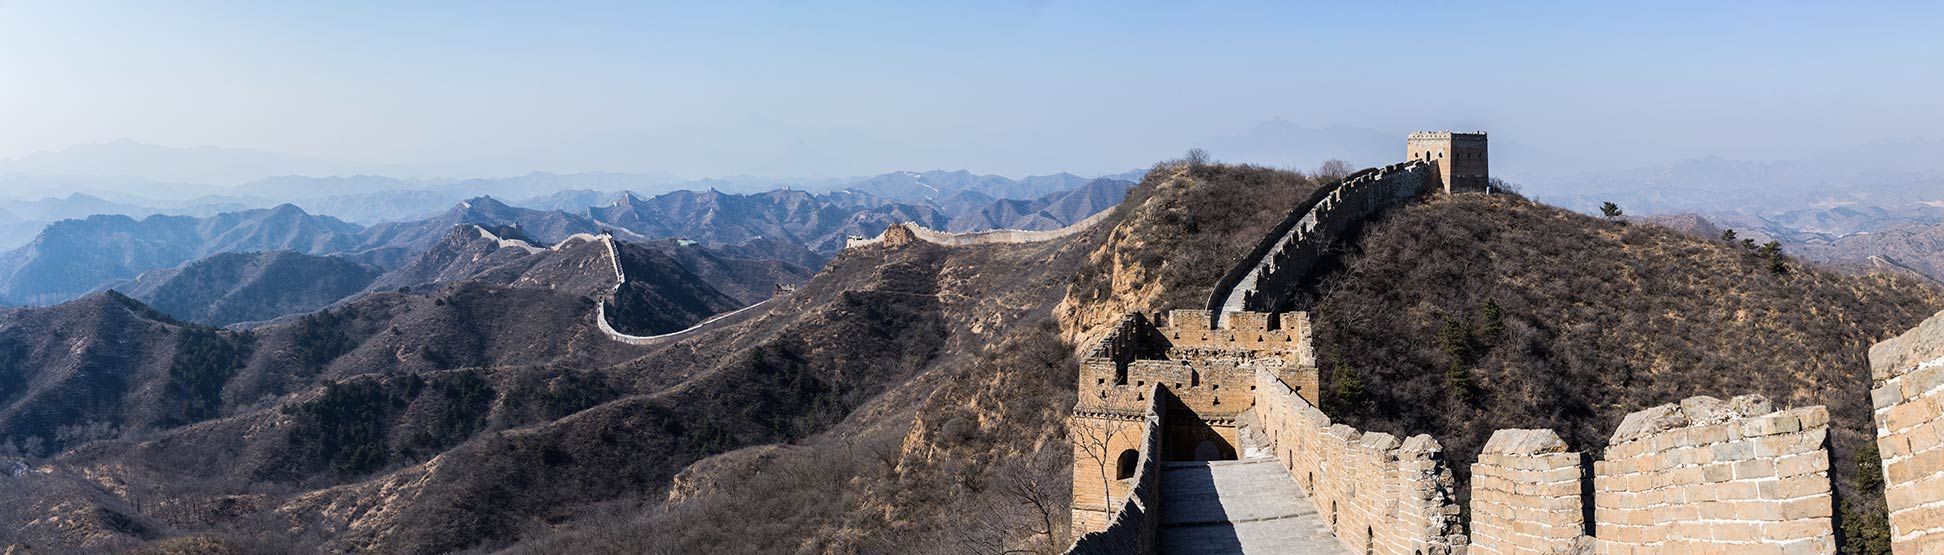 Meandering Great Wall of China